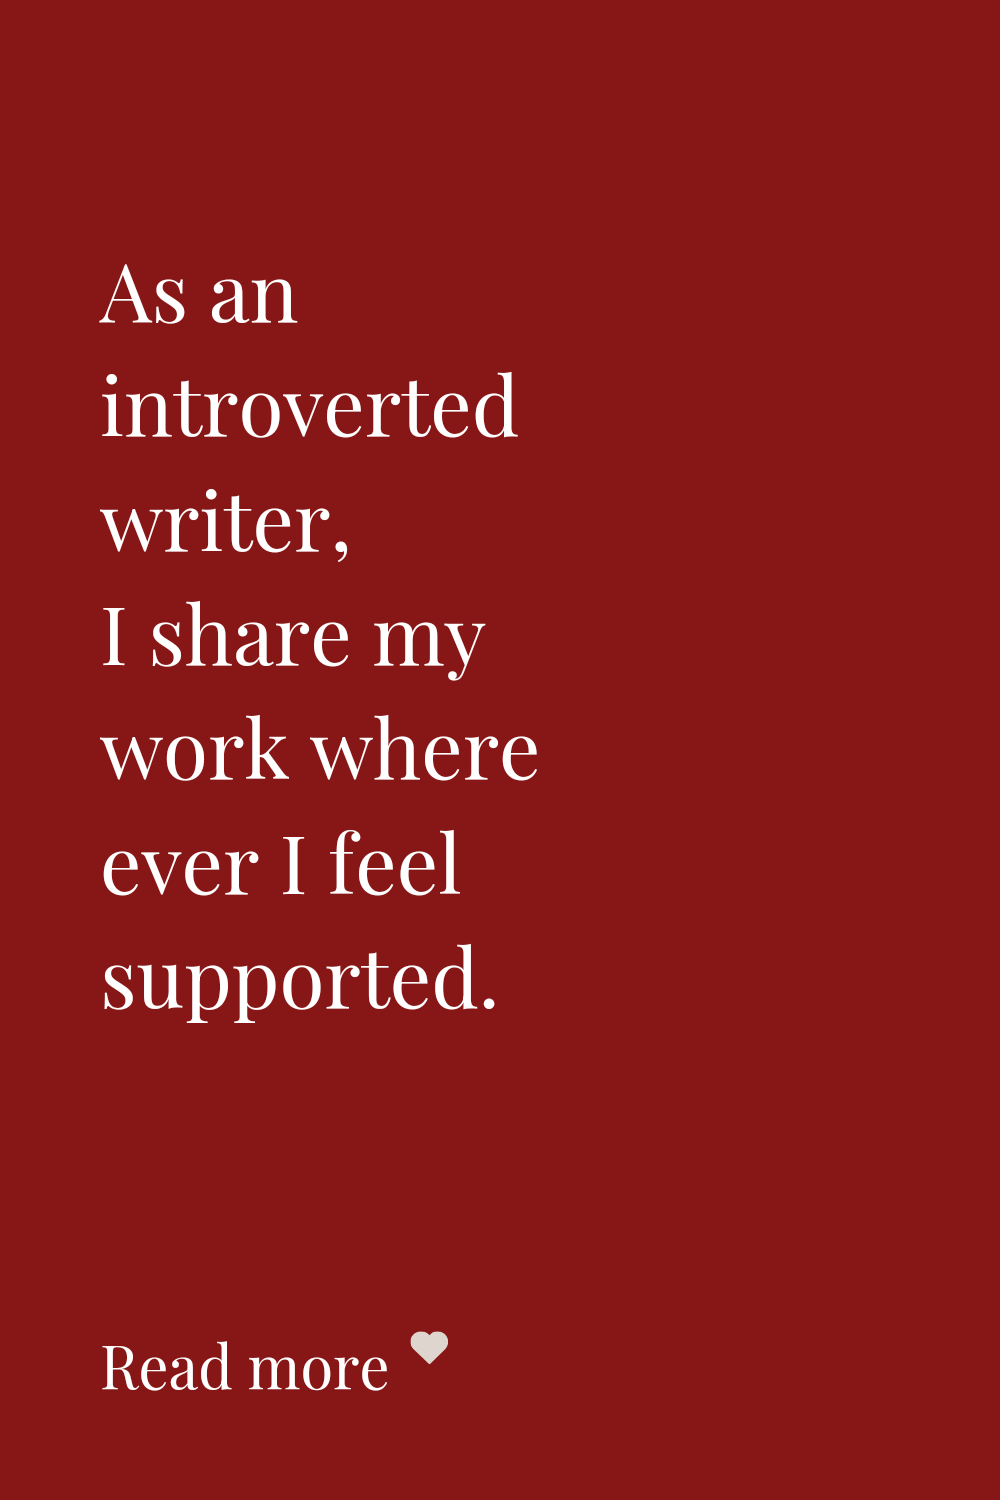 Introverted writer marketing share your work